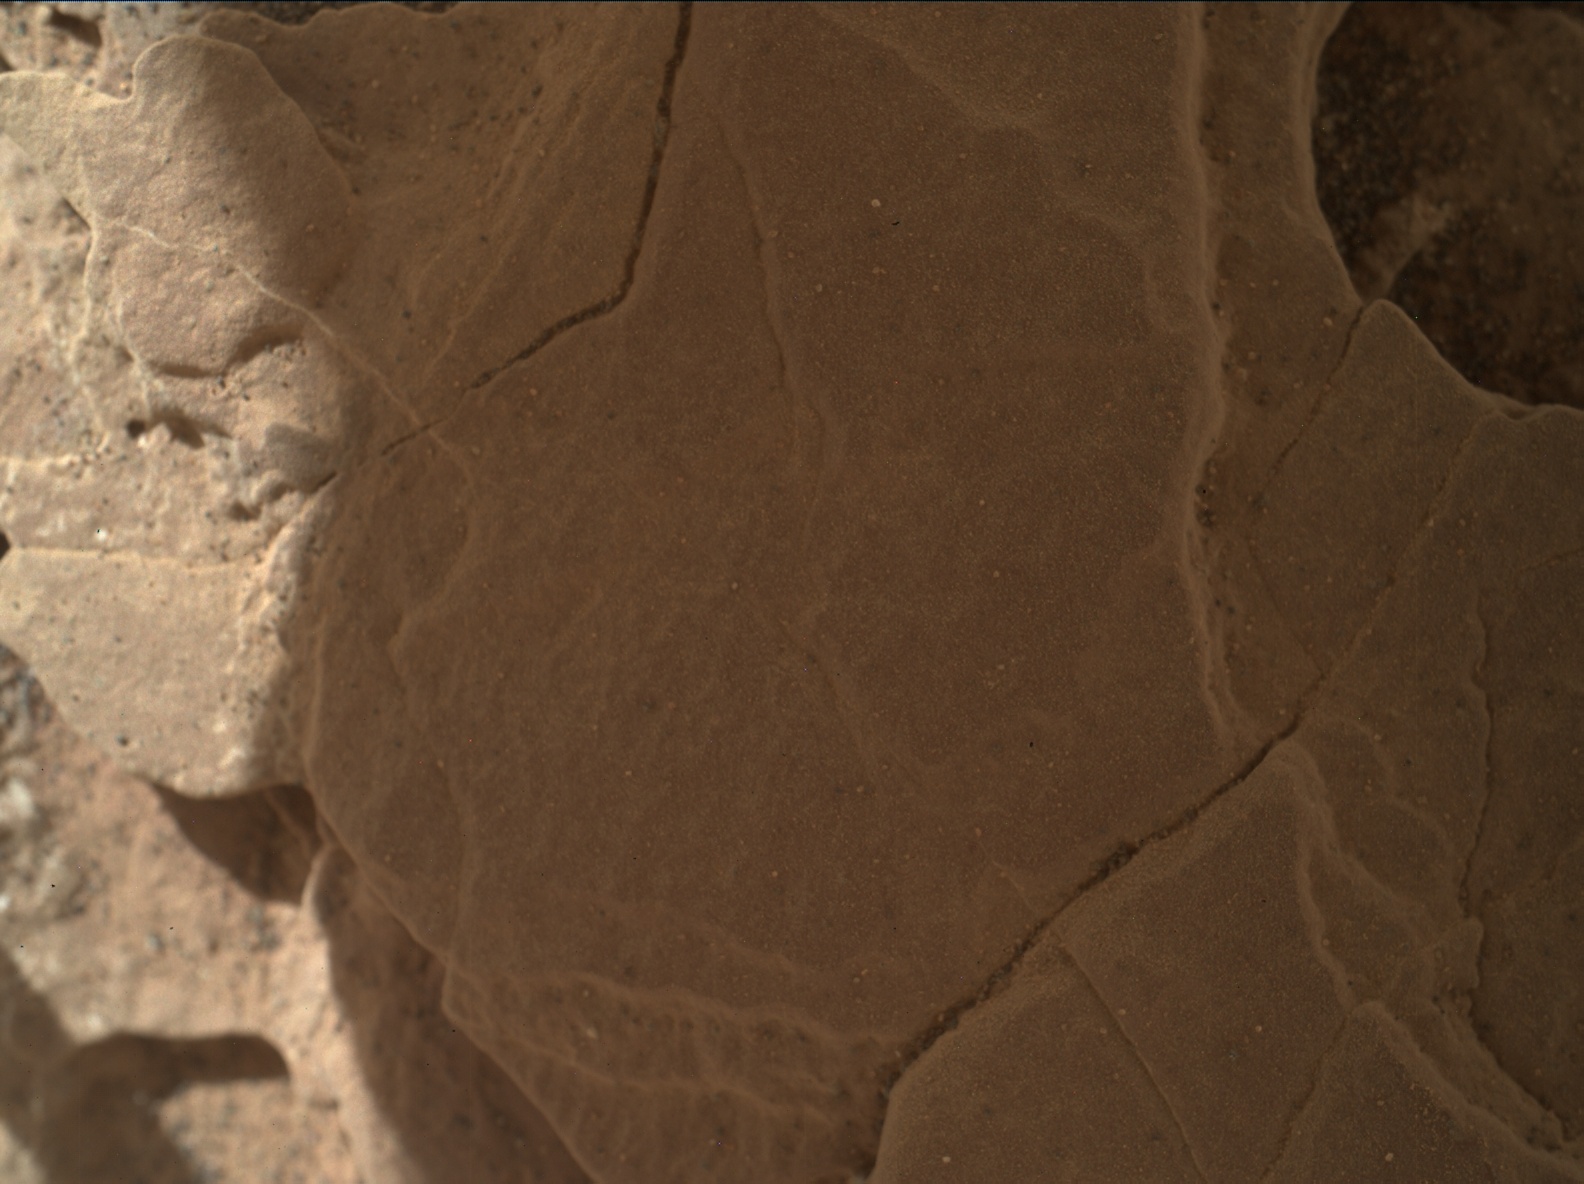 Nasa's Mars rover Curiosity acquired this image using its Mars Hand Lens Imager (MAHLI) on Sol 1744